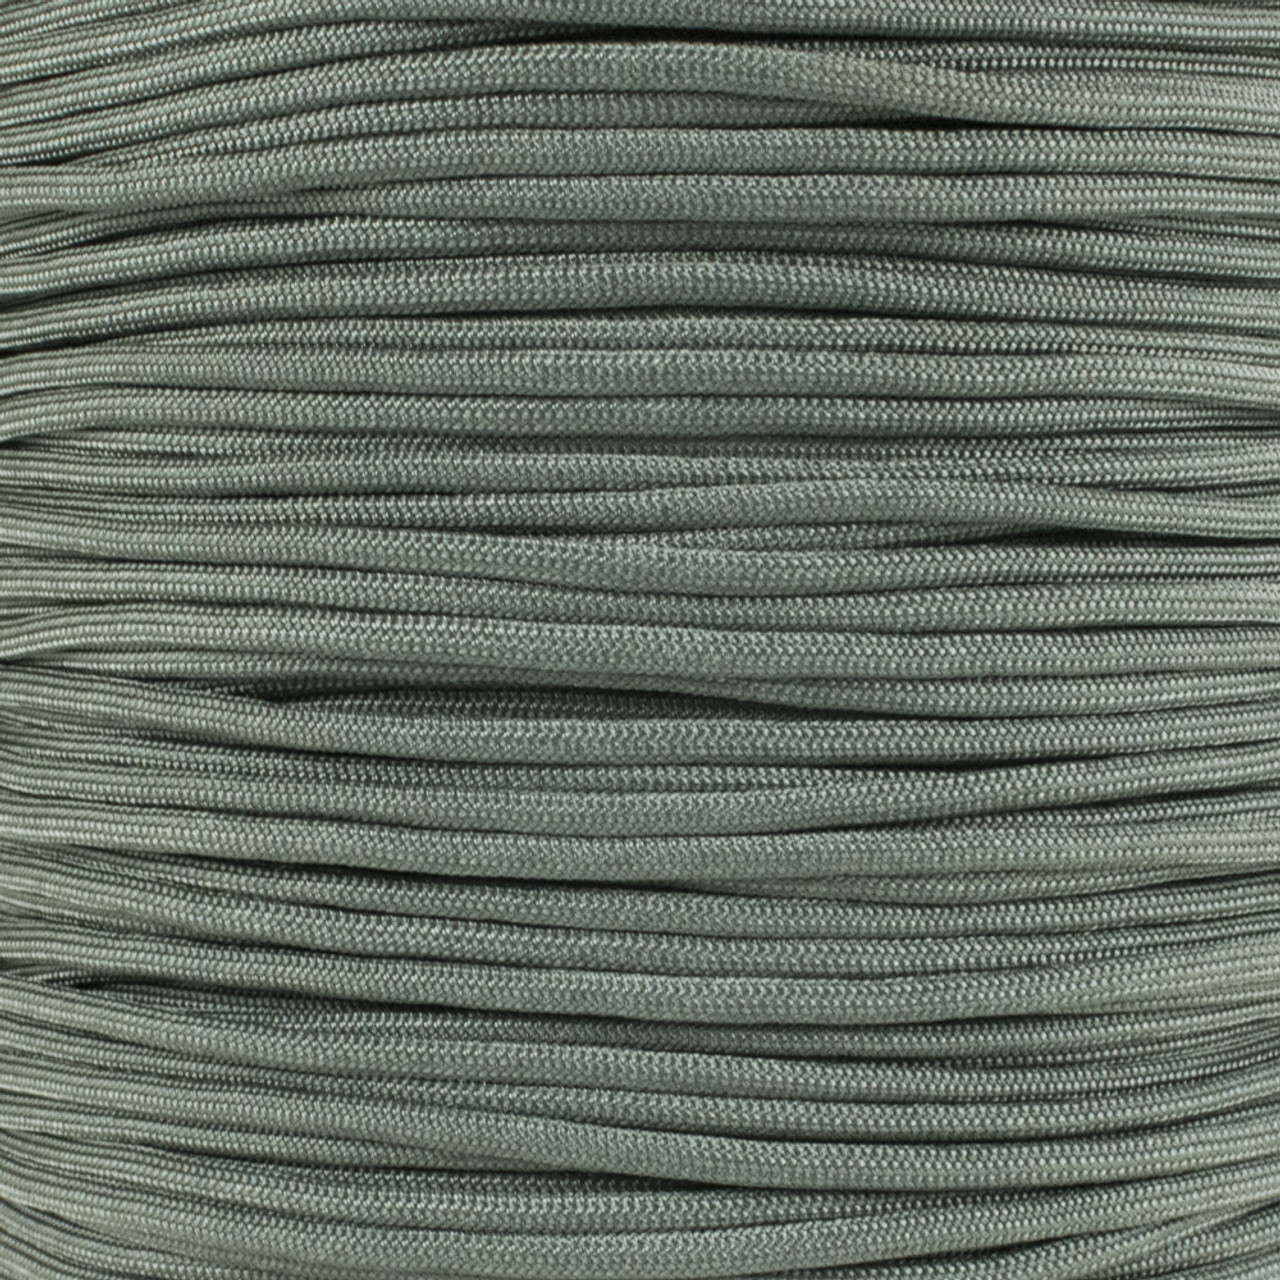 Sage Green 550 Type III MIL-C-5040 Paracord